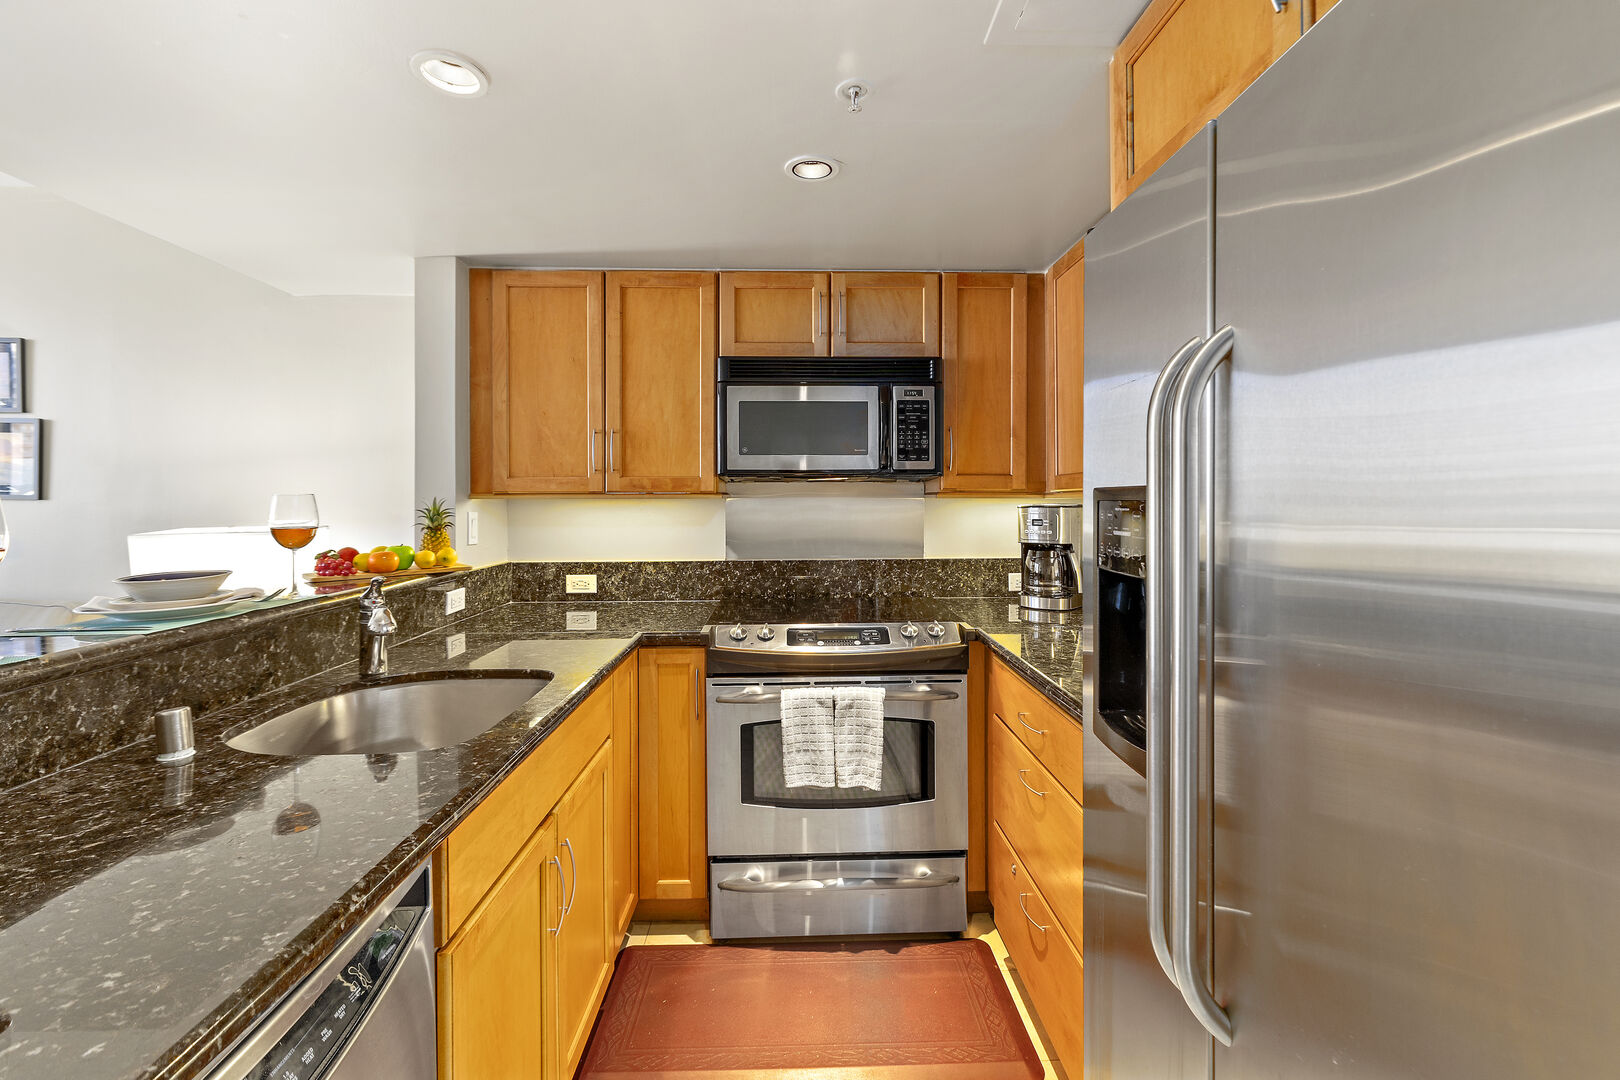 Fully equipped kitchen perfect for your culinary needs.